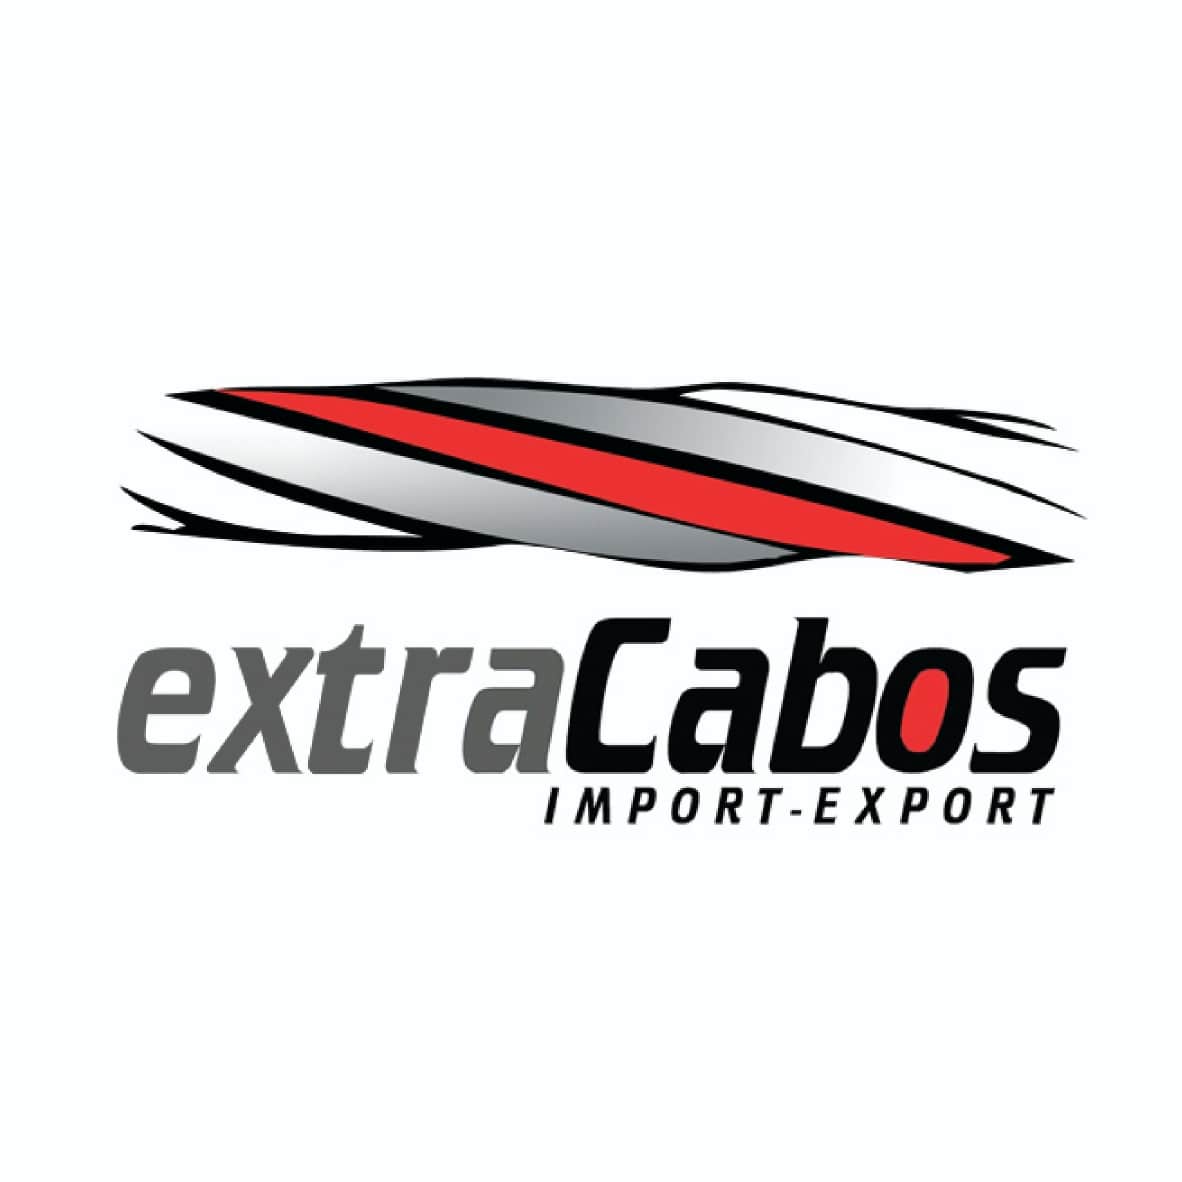 Extra Cabos